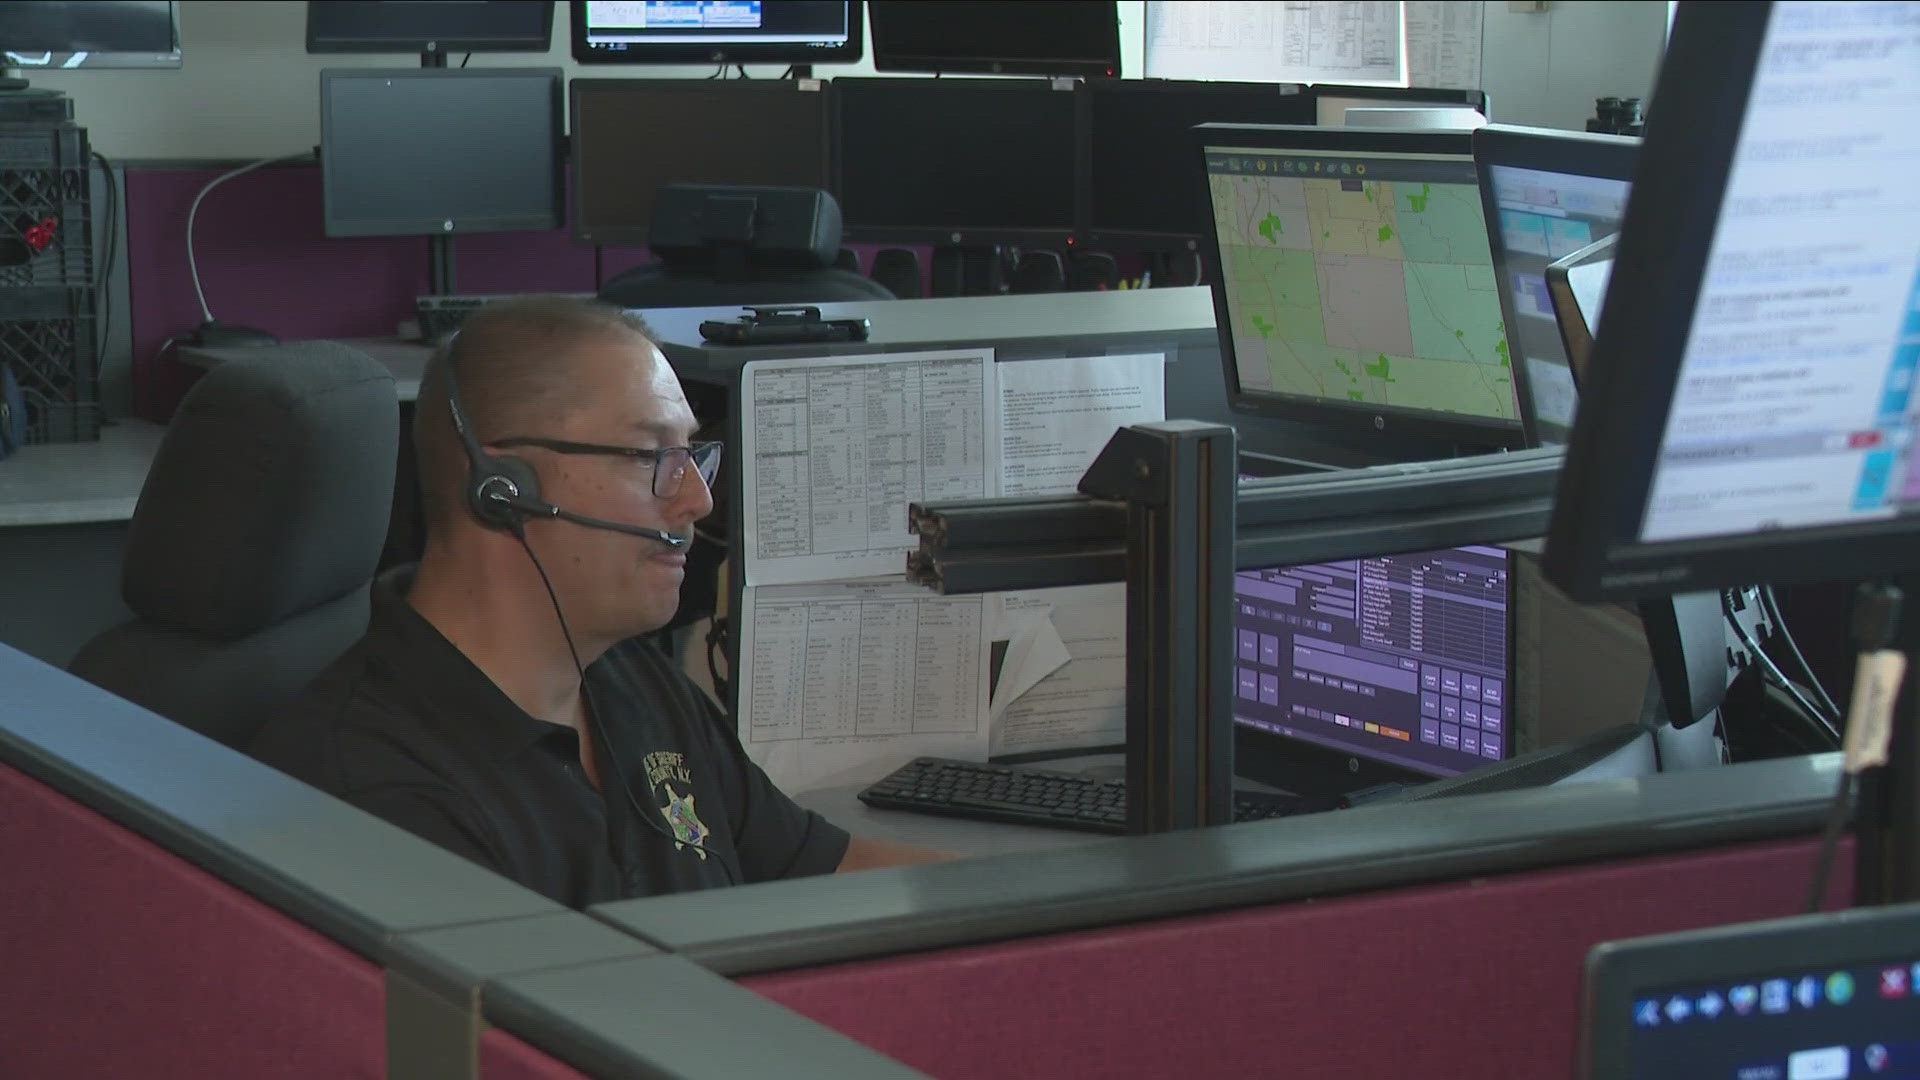 2 On Your Side spoke with a dispatcher with the Erie County Sheriff's Office on Thursday.